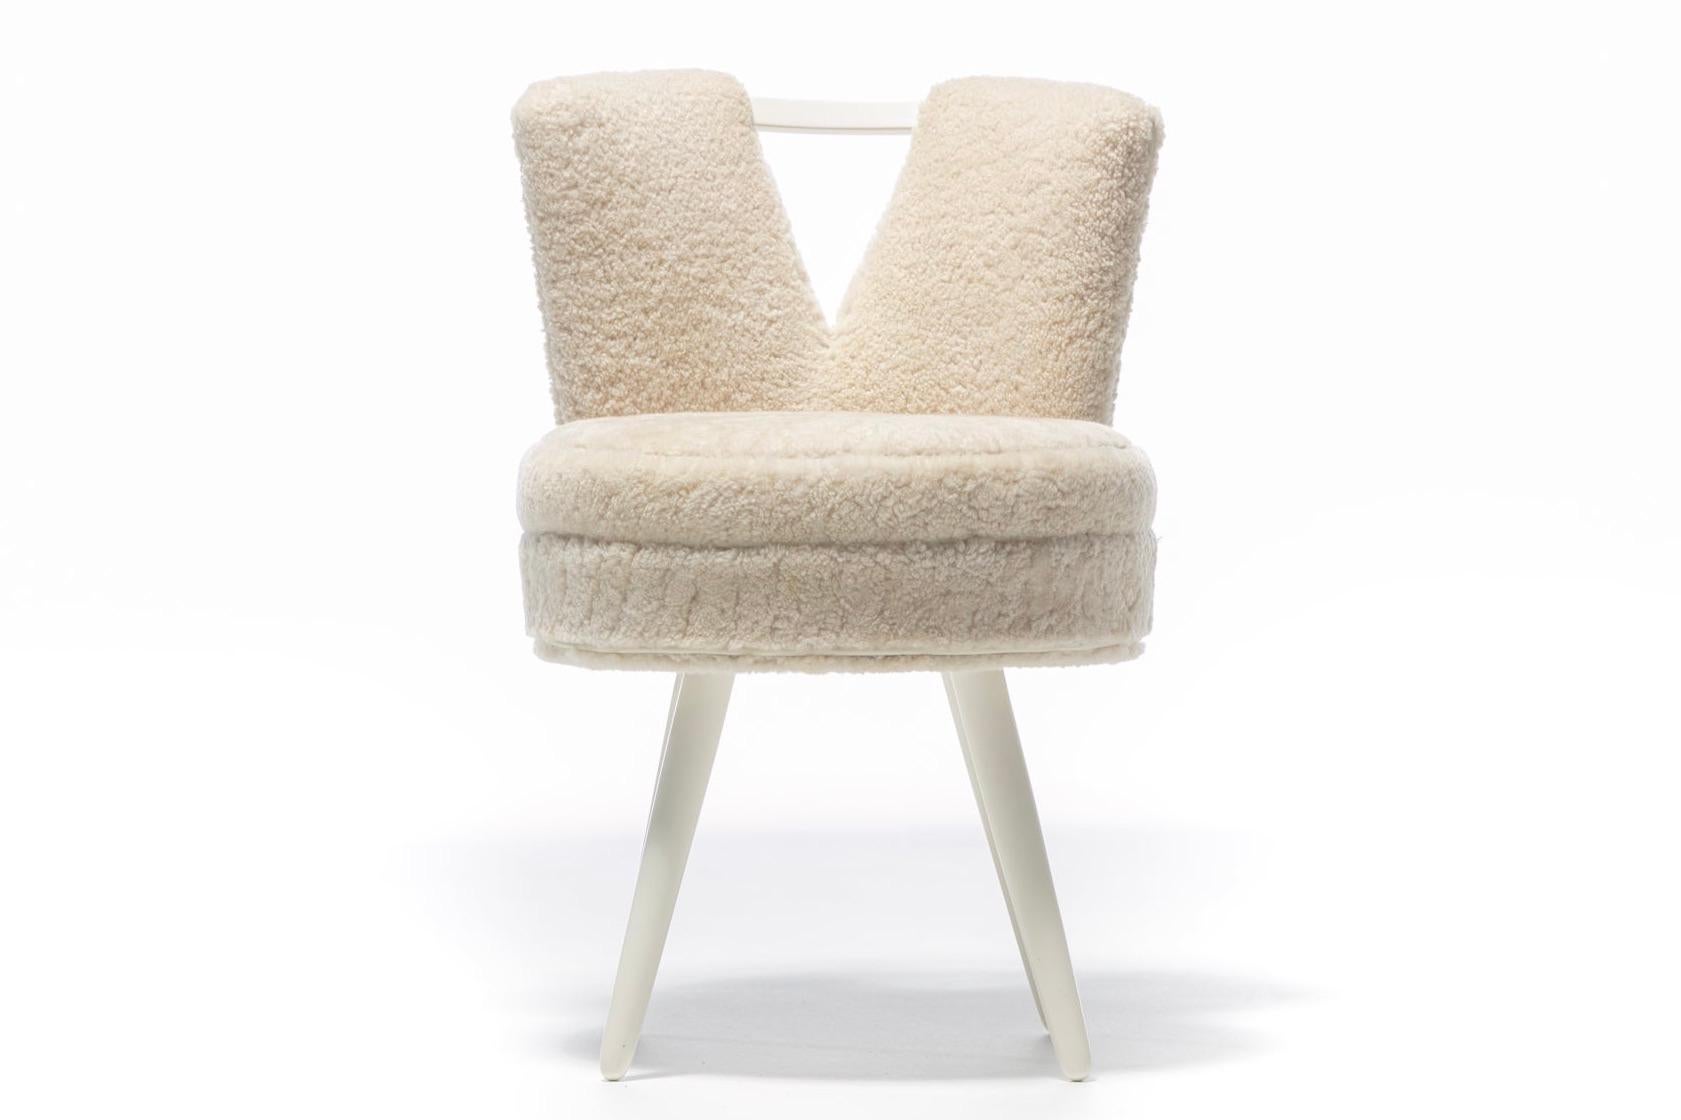 Custom Vanity Stool in Ivory Cream Shearling with Leather Trim 3